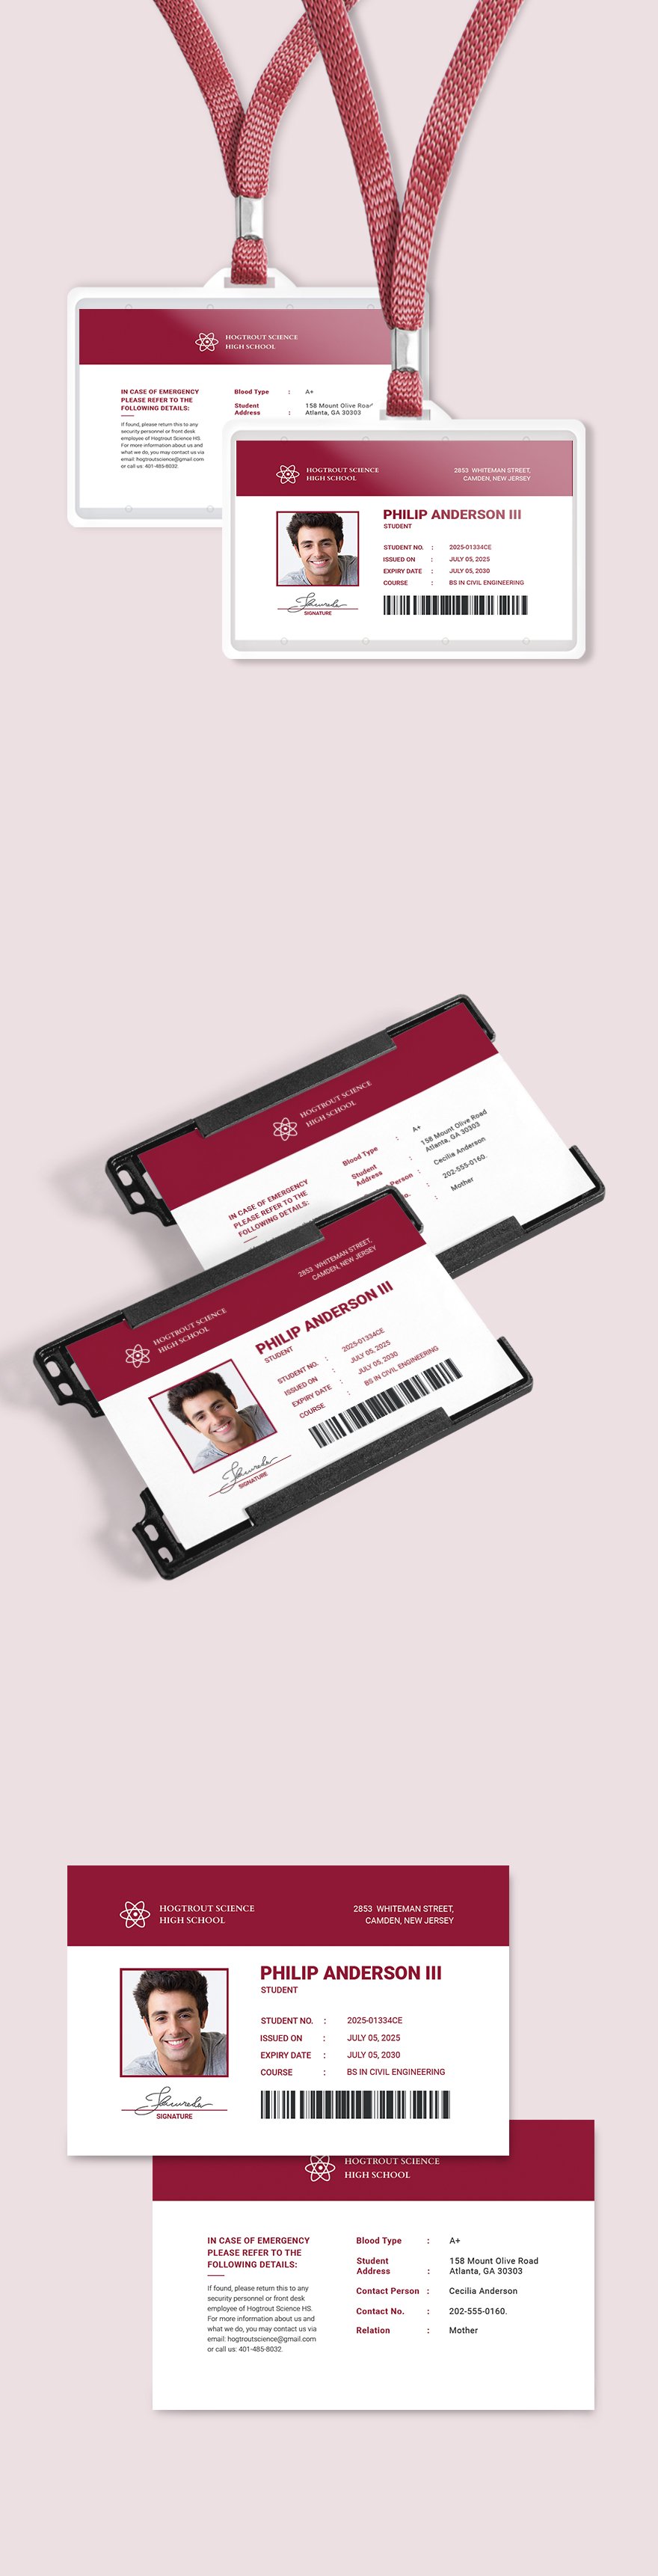 photoshop student id card template free download